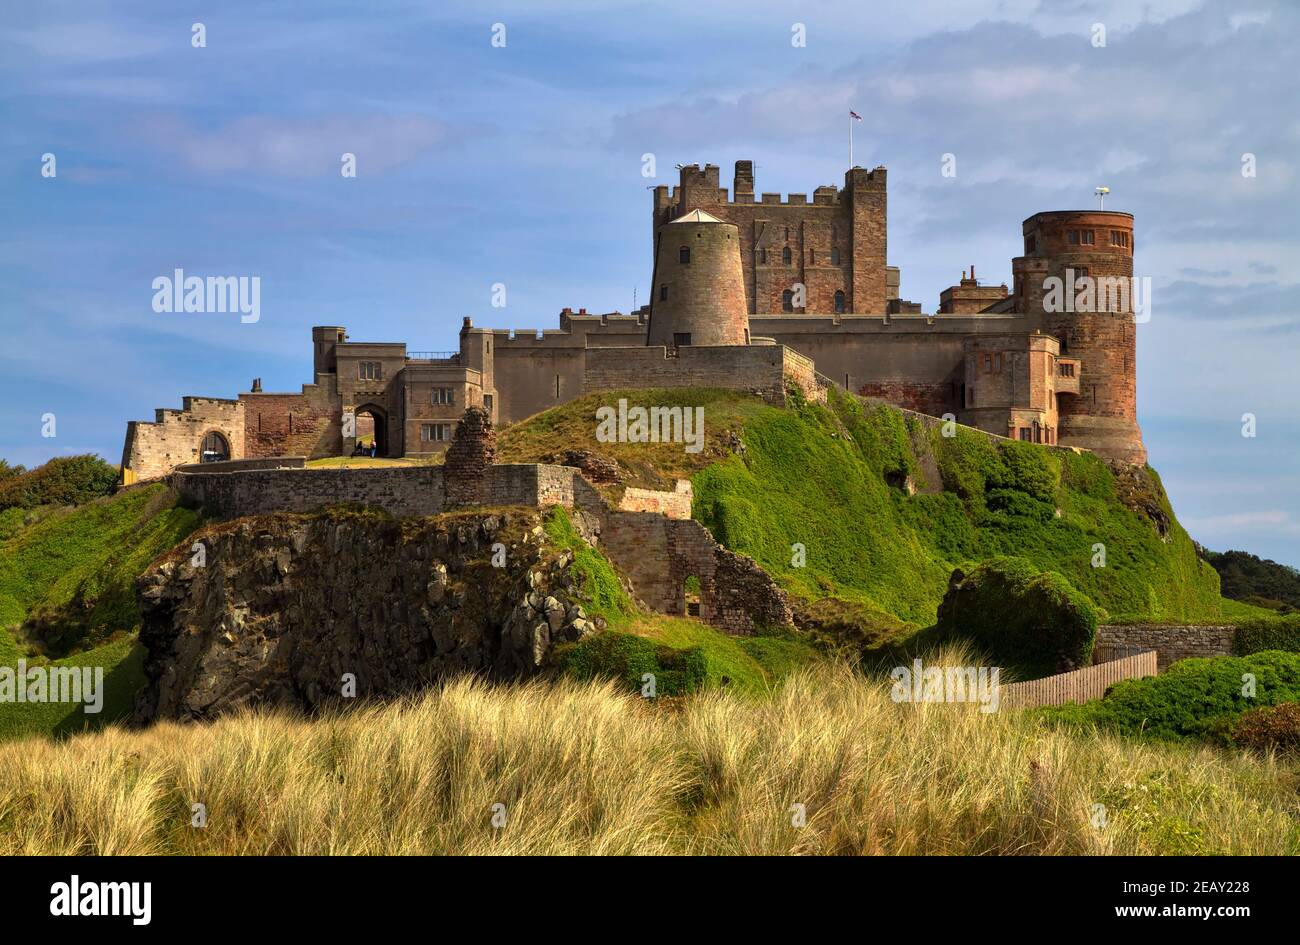 Bamburgh Castle, Northumberland. Built on an outcrop of volcanic dolerite, the castle is one of the largest inhabited castles in England. Stock Photo